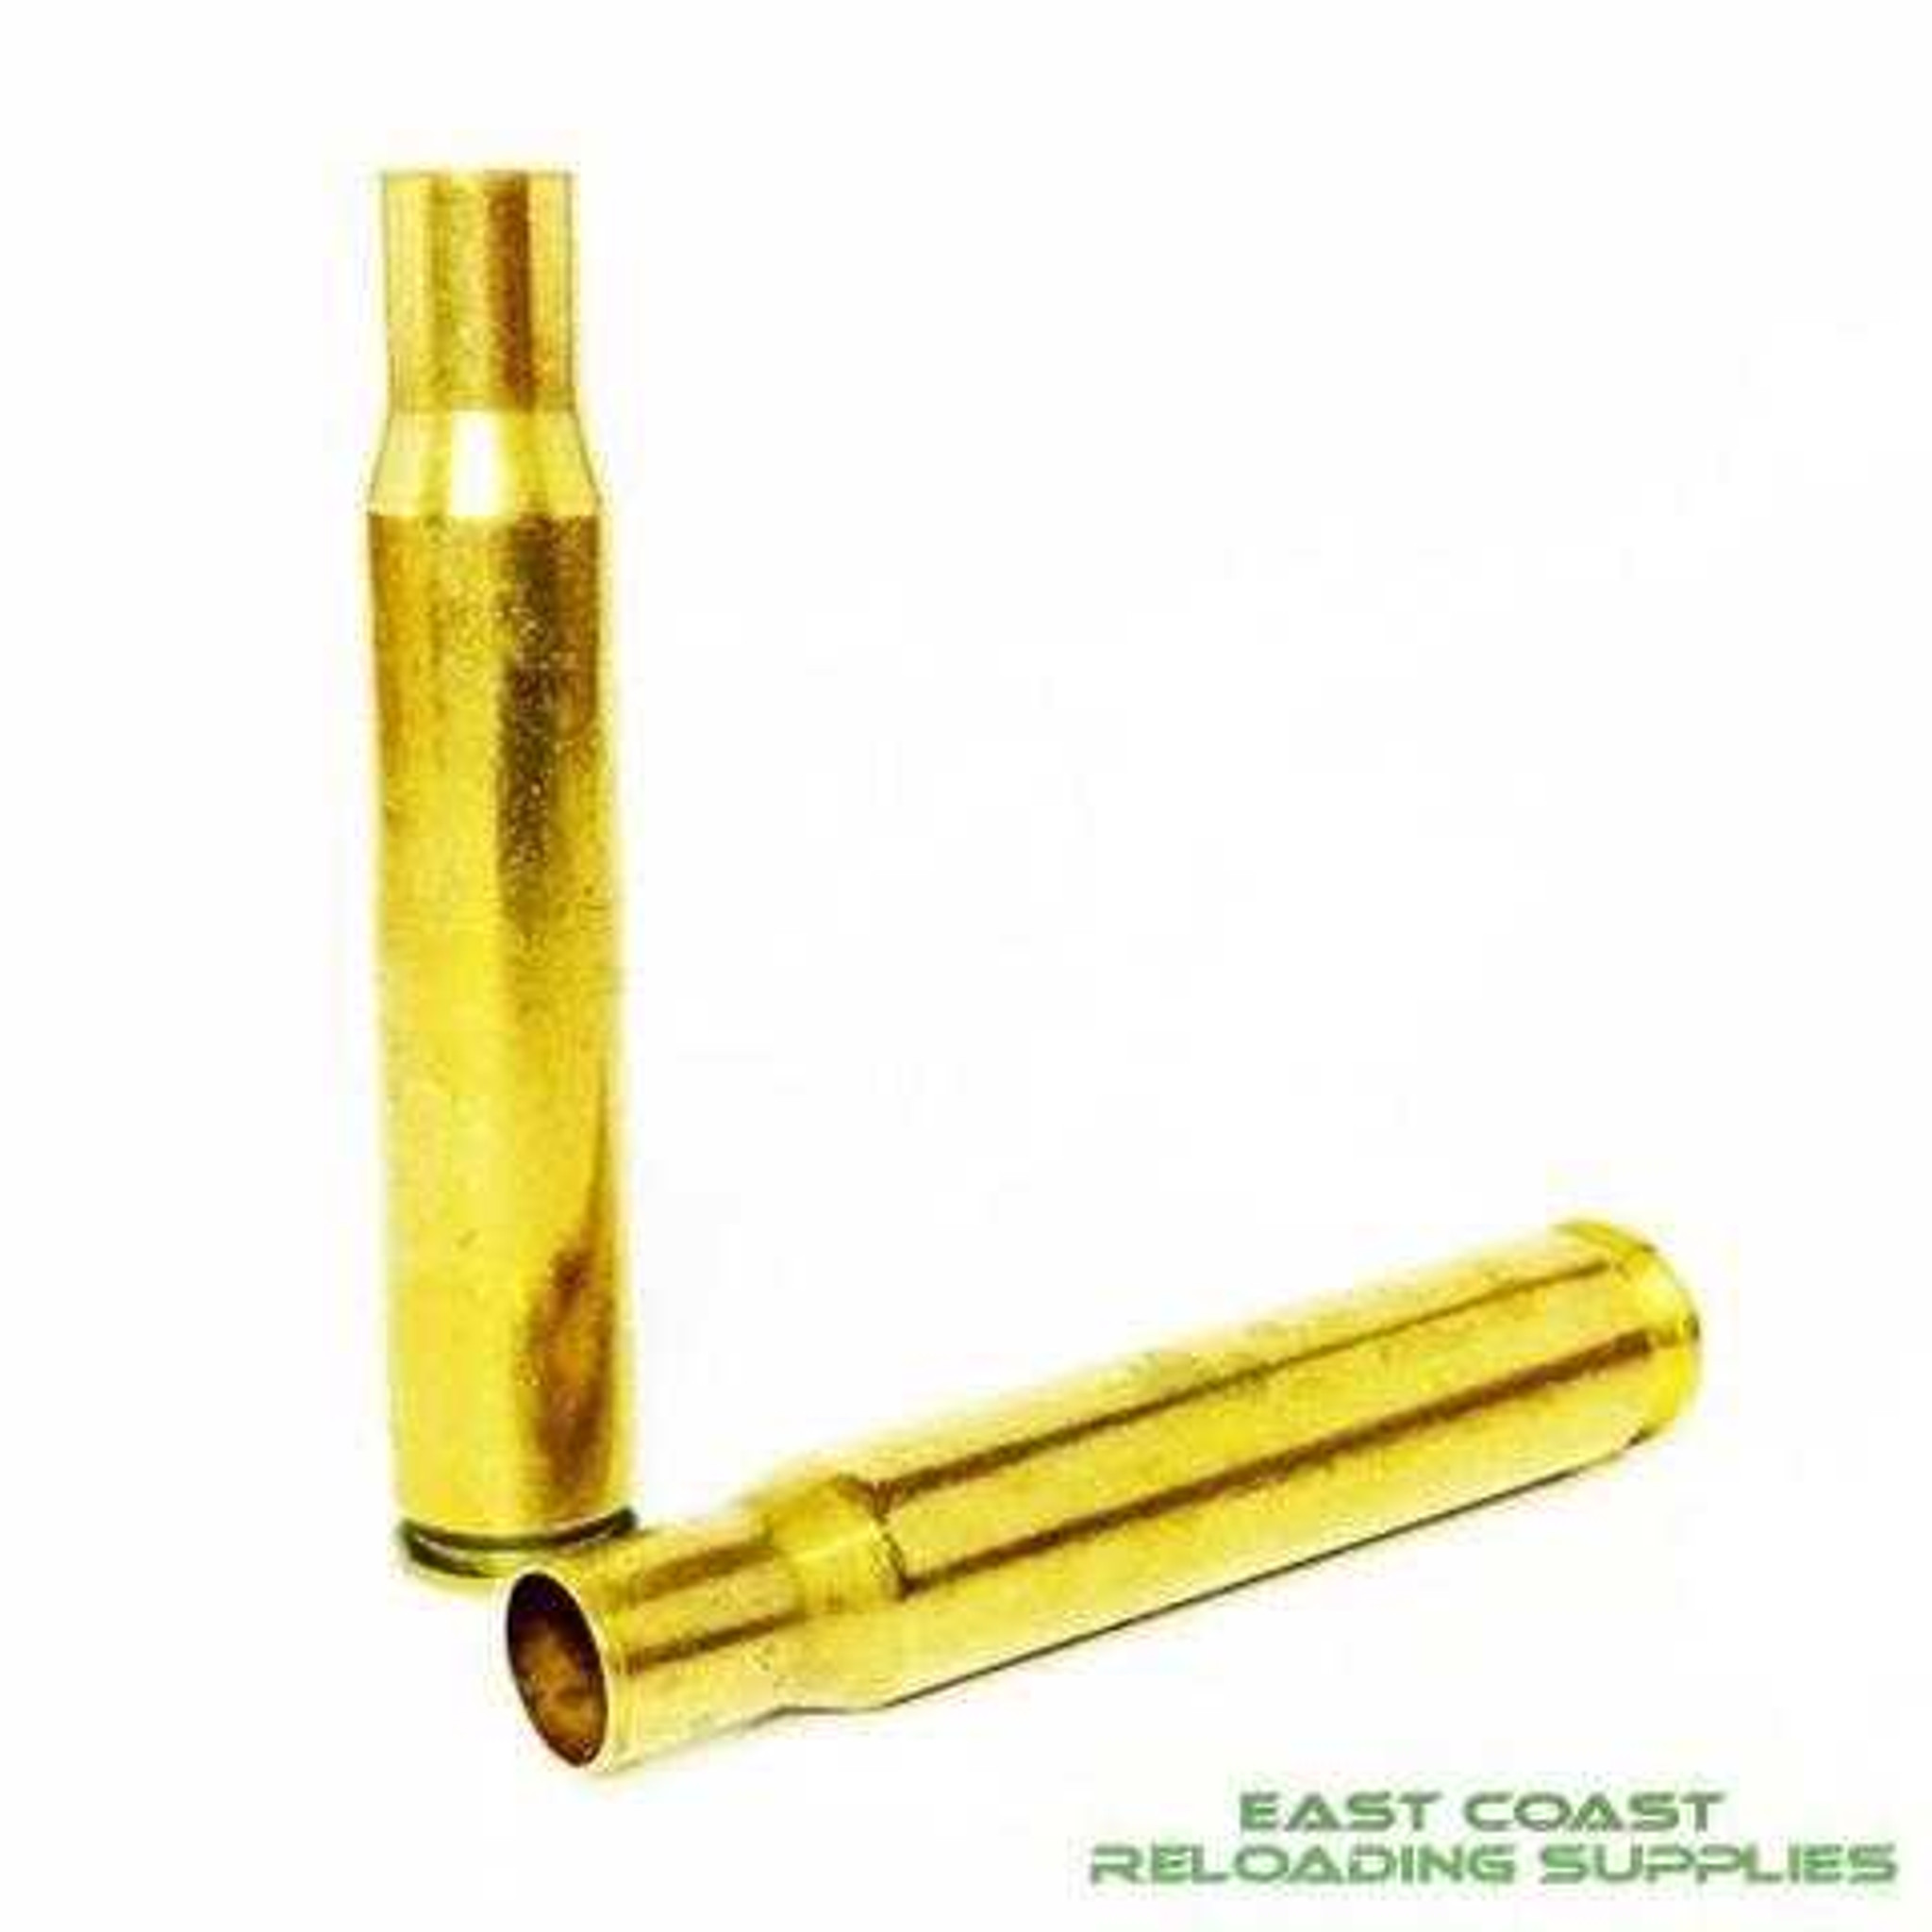 Top Brass 308 Winchester Reconditioned Unprimed Rifle Brass 500